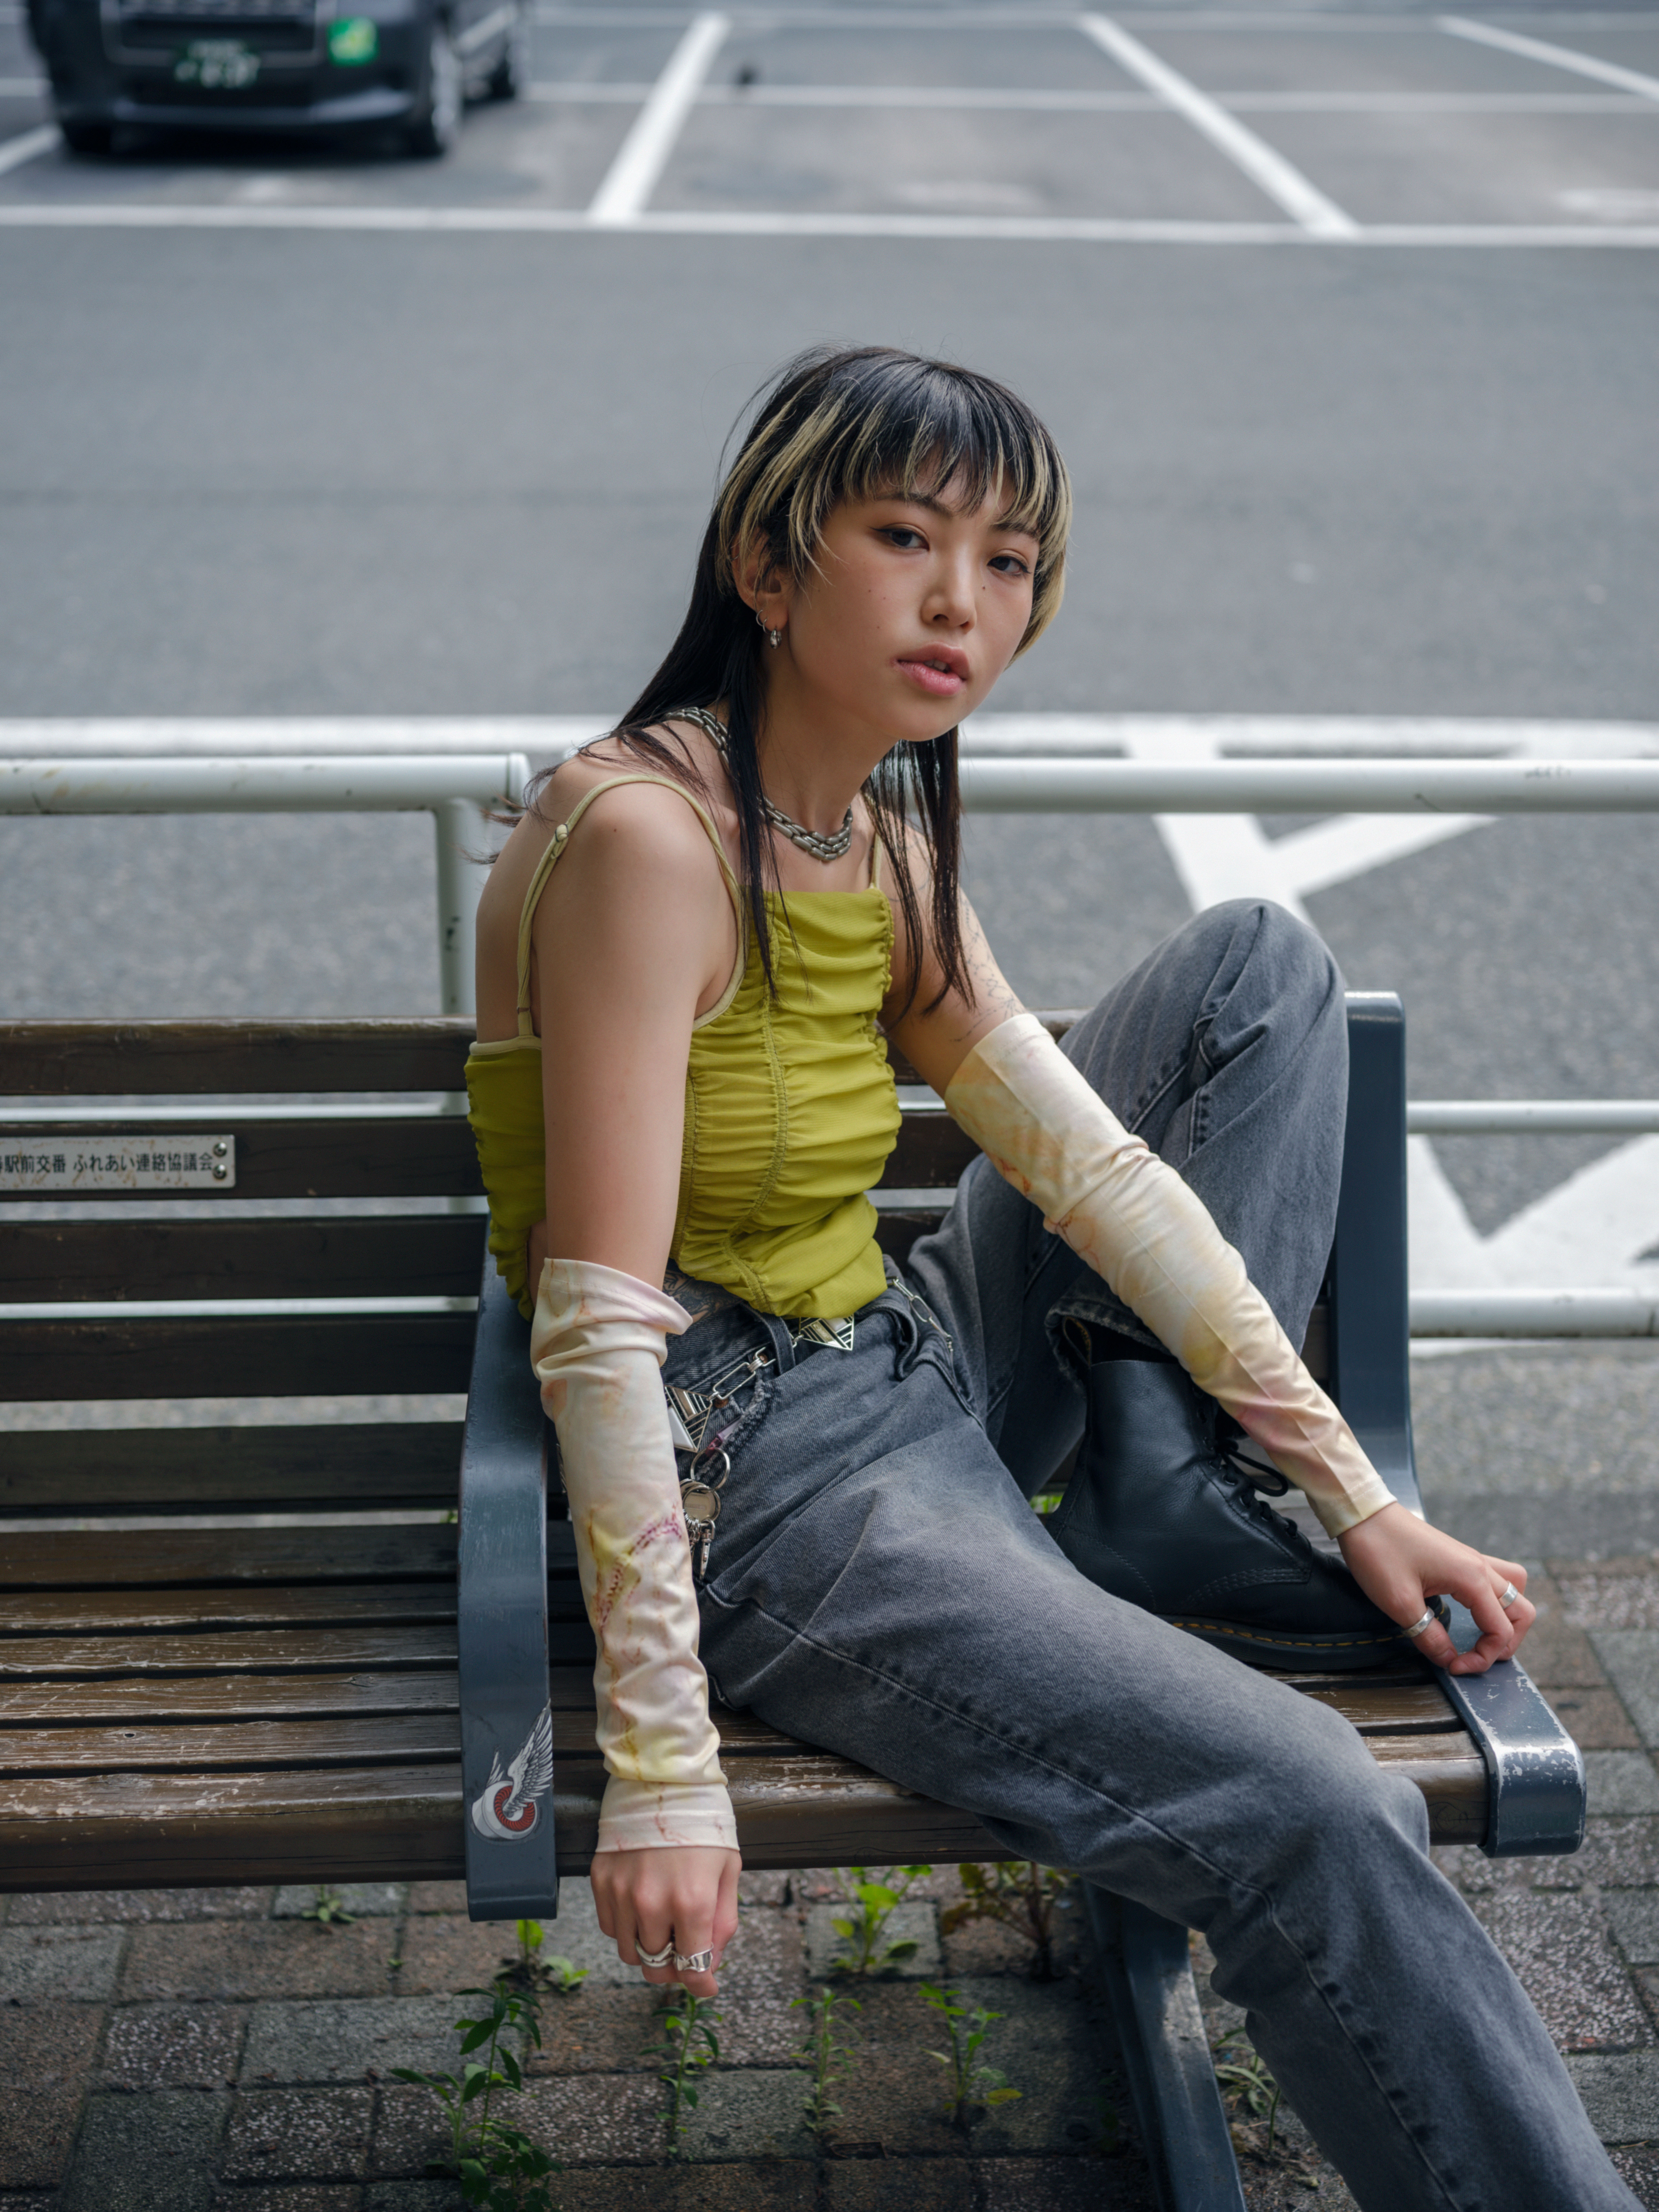 a person wearing jeans and a wrinkled green blouse (with bleached streaks in the hair) sits casually on a bench in tokyo